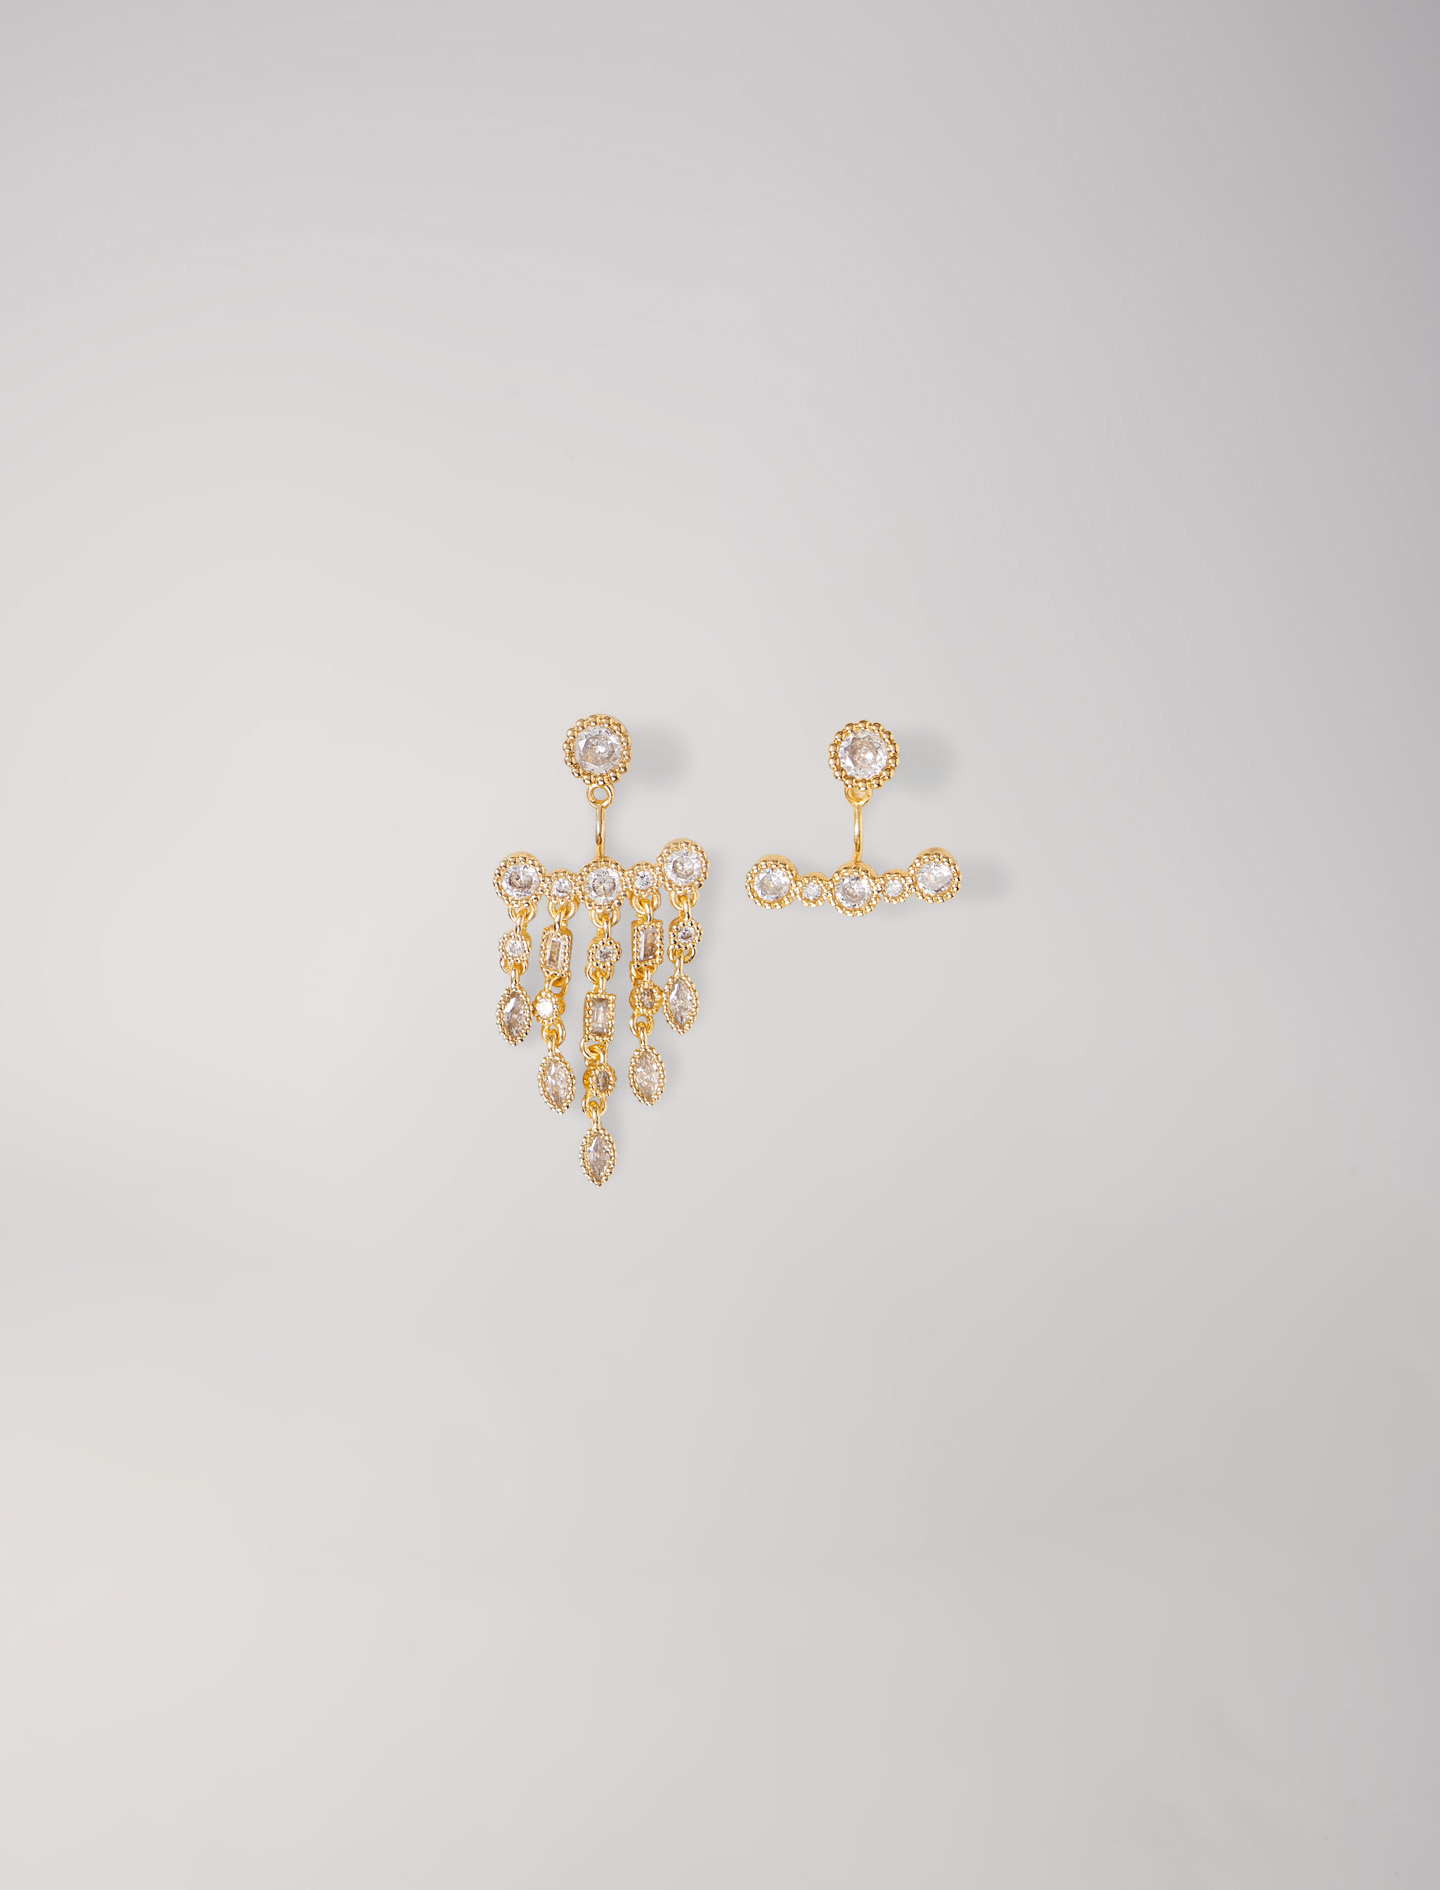 Maje Woman's glass Jewellery: Asymmetric earrings for Spring/Summer, in color Gold / Yellow